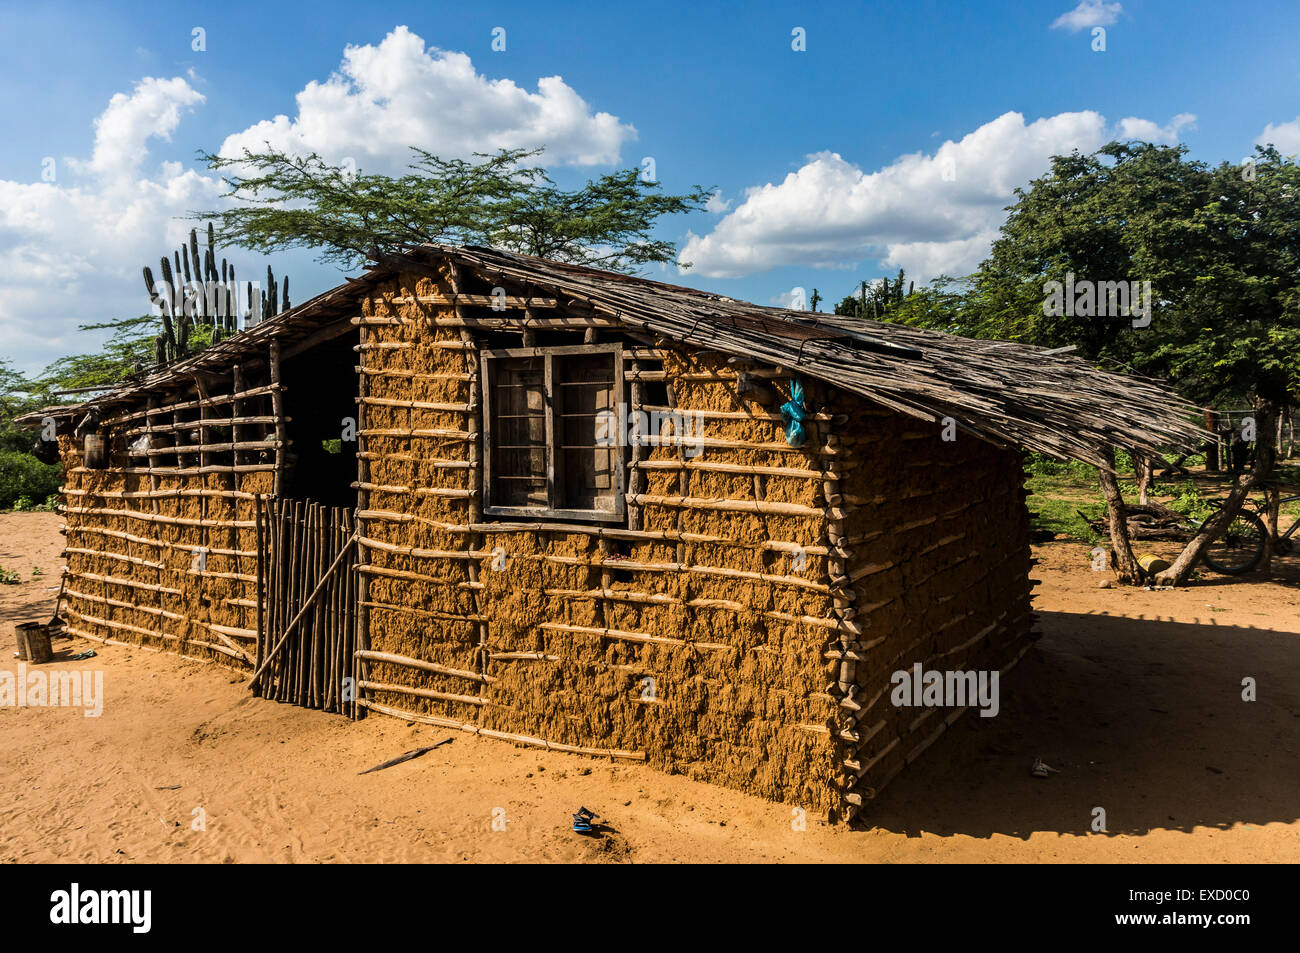 Traditional house made of cactus wood and earth in a Wayuu indigenous 'rancheria', or rural settlement, in La Guajira, Colombia. Stock Photo